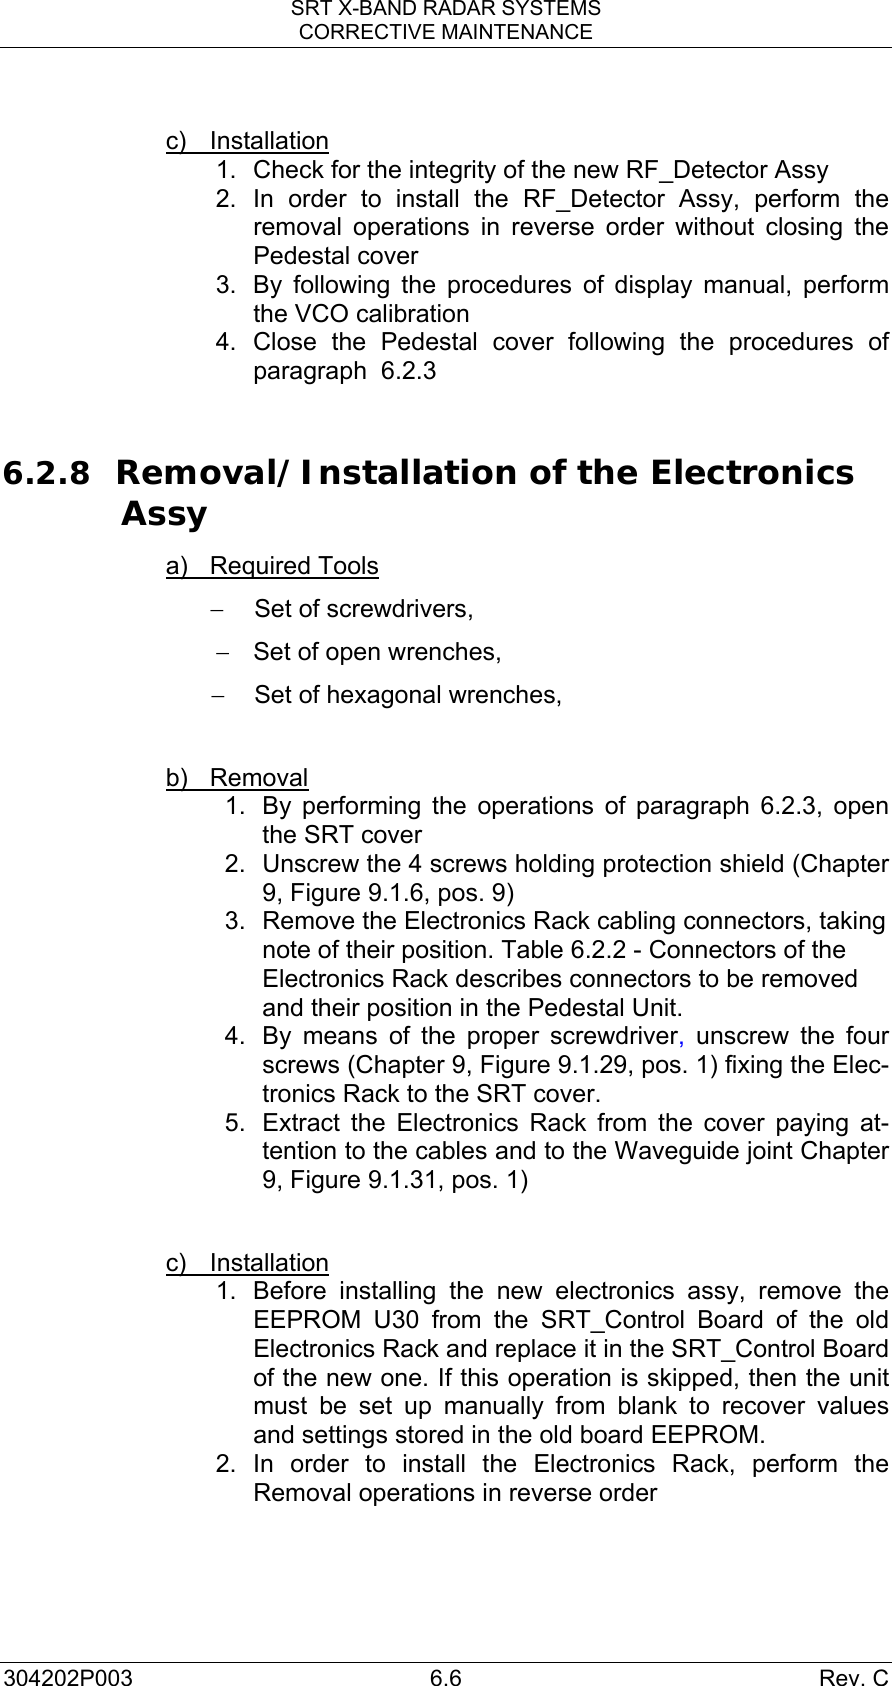 SRT X-BAND RADAR SYSTEMS CORRECTIVE MAINTENANCE 304202P003 6.6  Rev. C  c) Installation 1.  Check for the integrity of the new RF_Detector Assy 2. In order to install the RF_Detector Assy, perform the removal operations in reverse order without closing the Pedestal cover 3.  By following the procedures of display manual, perform the VCO calibration 4. Close the Pedestal cover following the procedures of paragraph  6.2.3  6.2.8 Removal/Installation of the Electronics Assy a) Required Tools −  Set of screwdrivers, −  Set of open wrenches, −  Set of hexagonal wrenches,  b) Removal  1.  By performing the operations of paragraph 6.2.3, open the SRT cover  2.  Unscrew the 4 screws holding protection shield (Chapter 9, Figure 9.1.6, pos. 9) 3.  Remove the Electronics Rack cabling connectors, taking note of their position. Table 6.2.2 - Connectors of the Electronics Rack describes connectors to be removed and their position in the Pedestal Unit.   4.  By means of the proper screwdriver, unscrew the four screws (Chapter 9, Figure 9.1.29, pos. 1) fixing the Elec-tronics Rack to the SRT cover. 5.  Extract the Electronics Rack from the cover paying at-tention to the cables and to the Waveguide joint Chapter 9, Figure 9.1.31, pos. 1)  c) Installation 1.  Before installing the new electronics assy, remove the EEPROM U30 from the SRT_Control Board of the old Electronics Rack and replace it in the SRT_Control Board of the new one. If this operation is skipped, then the unit must be set up manually from blank to recover values and settings stored in the old board EEPROM. 2. In order to install the Electronics Rack, perform the Removal operations in reverse order   